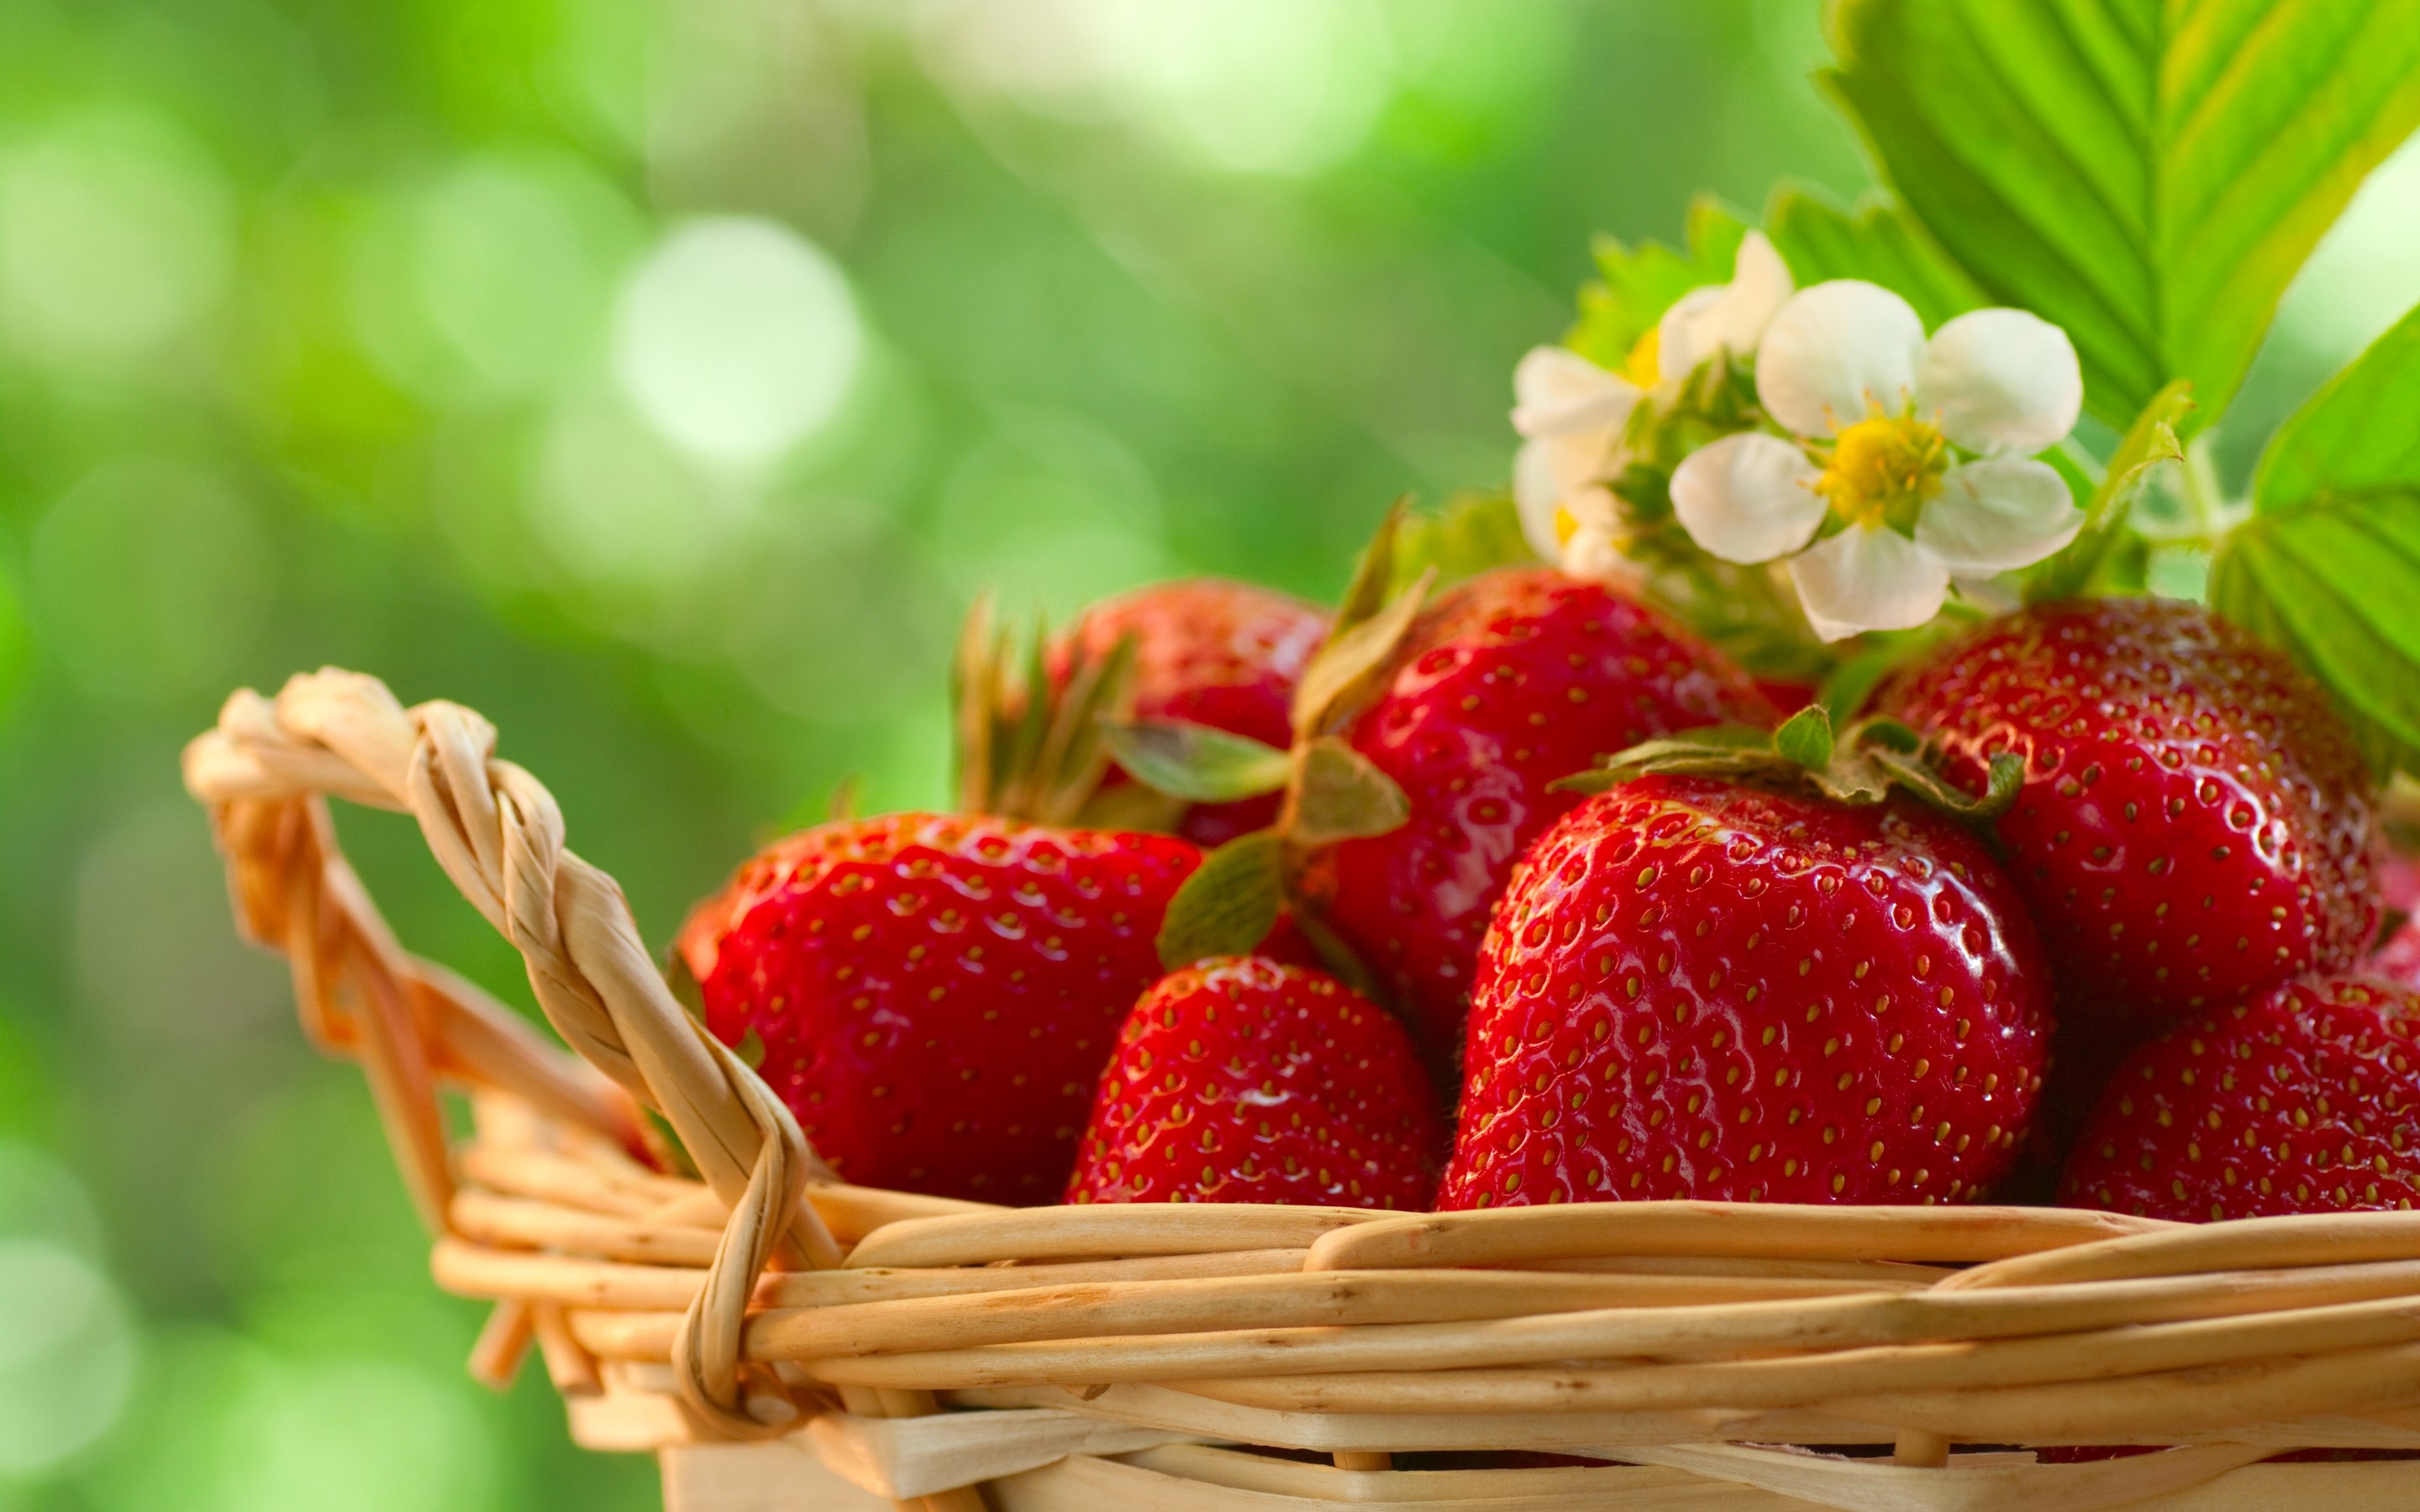 mithai wallpaper,natural foods,strawberry,strawberries,fruit,berry